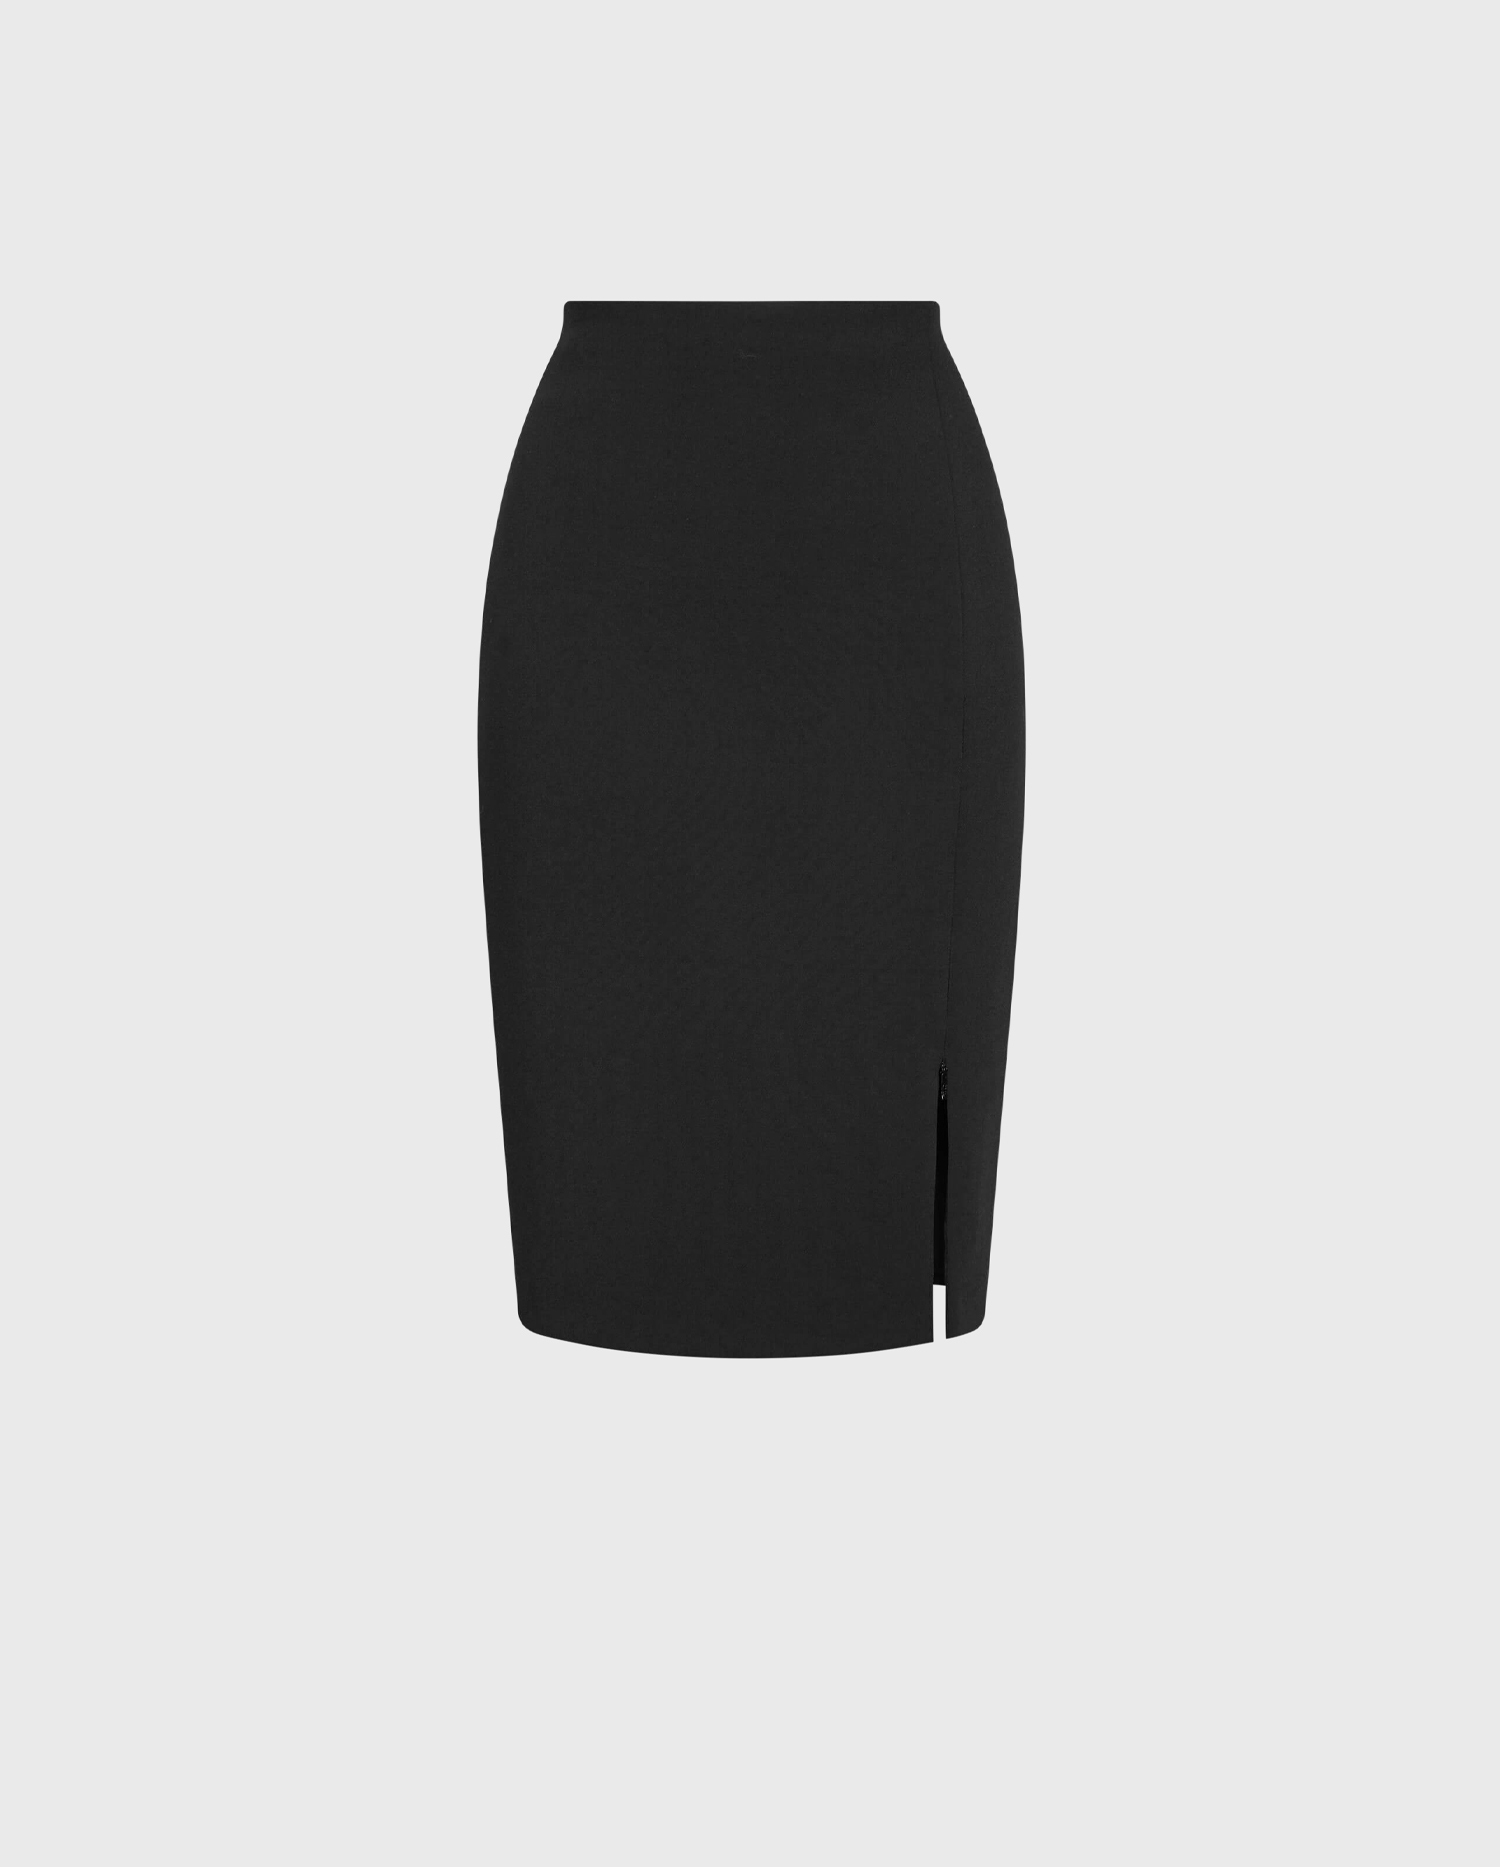 Discover the ABELLA black crepe skirt from designer ANNE FONTAINE